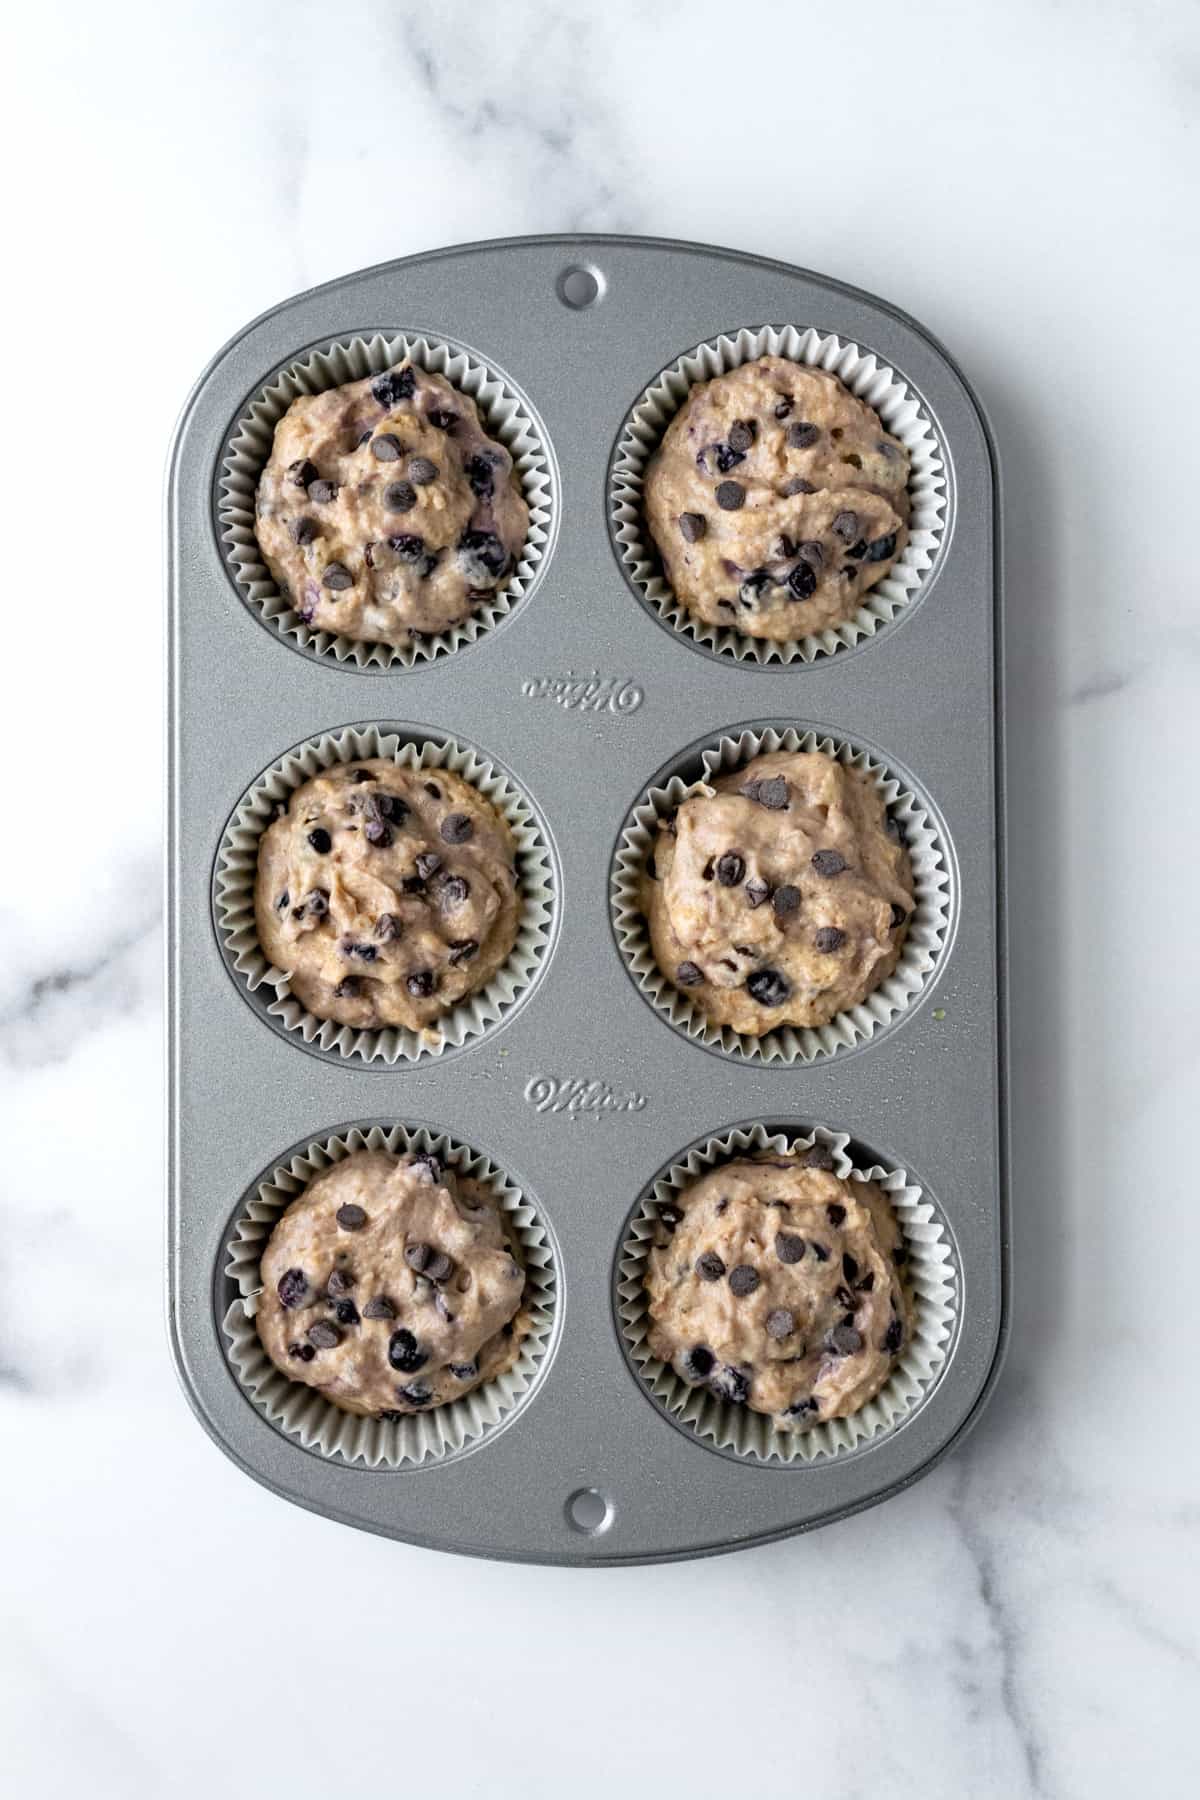 Blueberry Chocolate Chip Muffin Batter in 6 cup Muffin Pan.